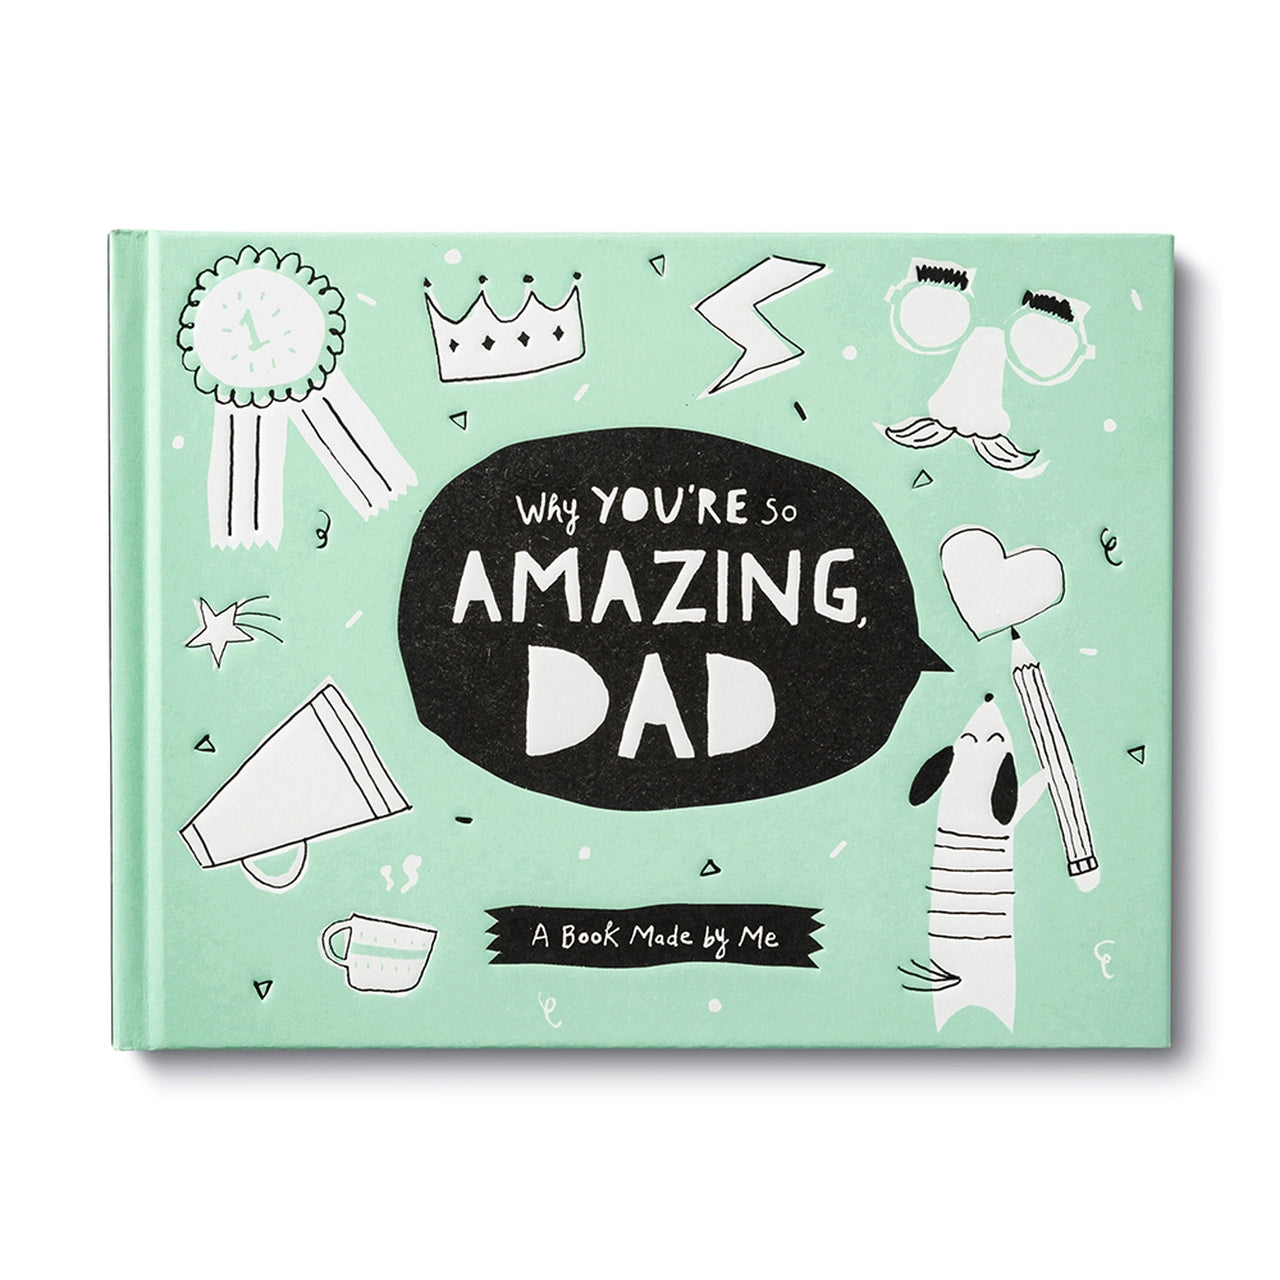 Why Your So Amazing, Dad | A Book Made By Me